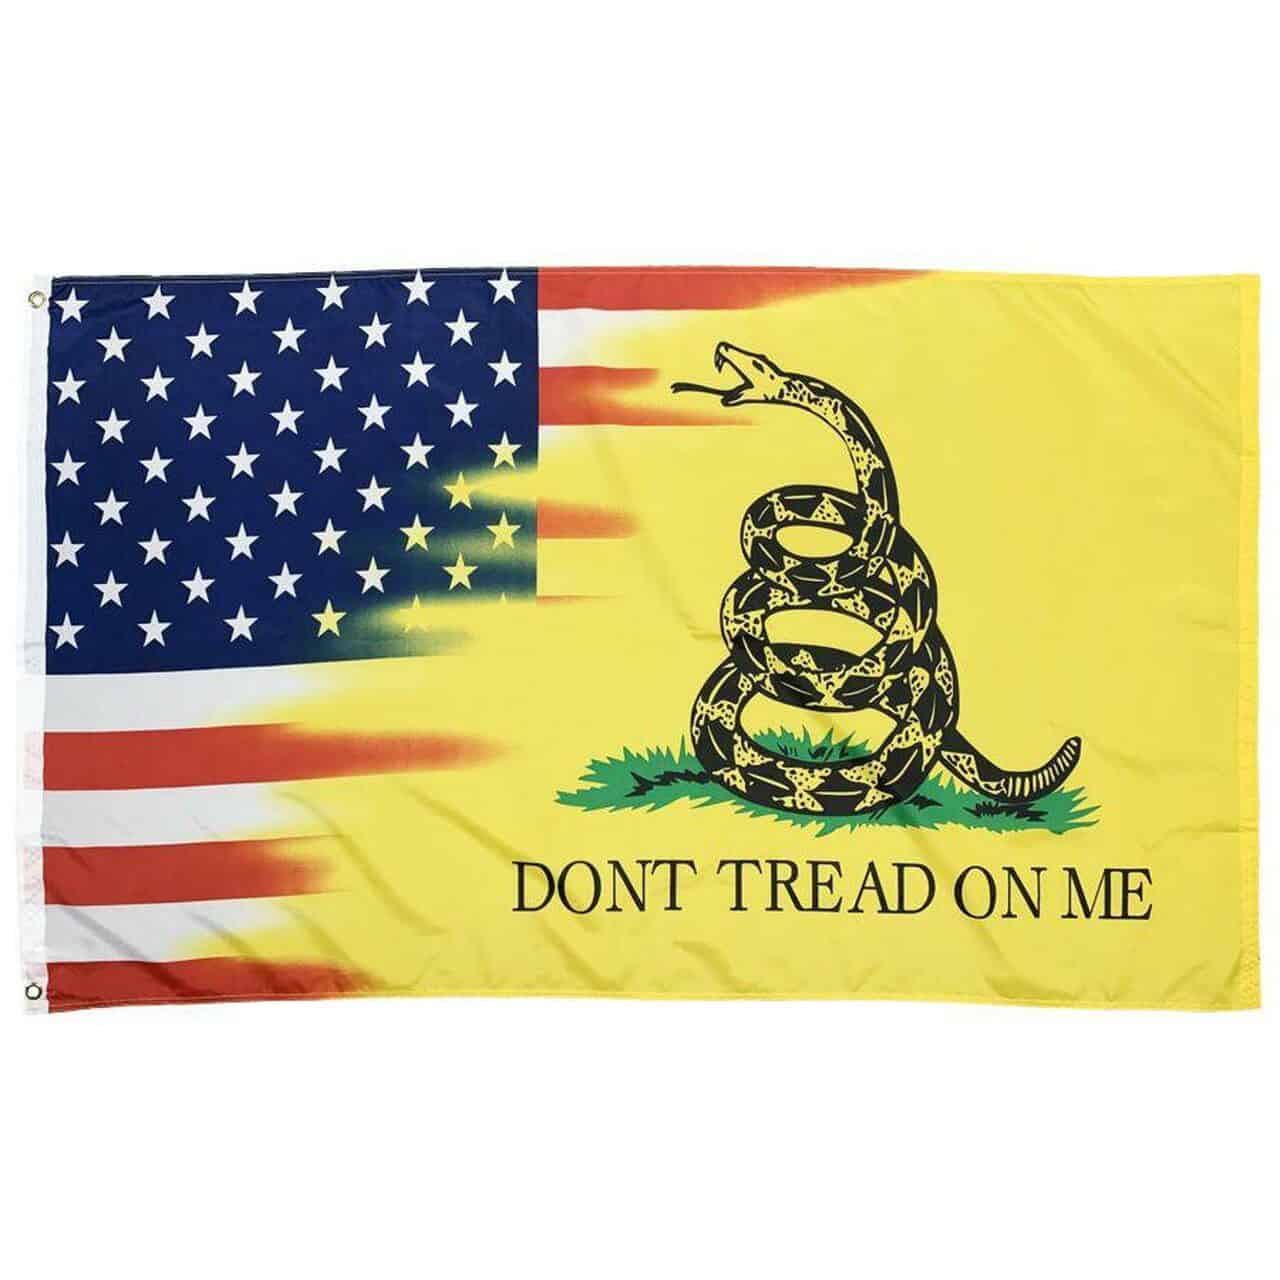 3x5 South Vietnam 2 Faced 2-ply Wind Resistant Flag 3x5ft